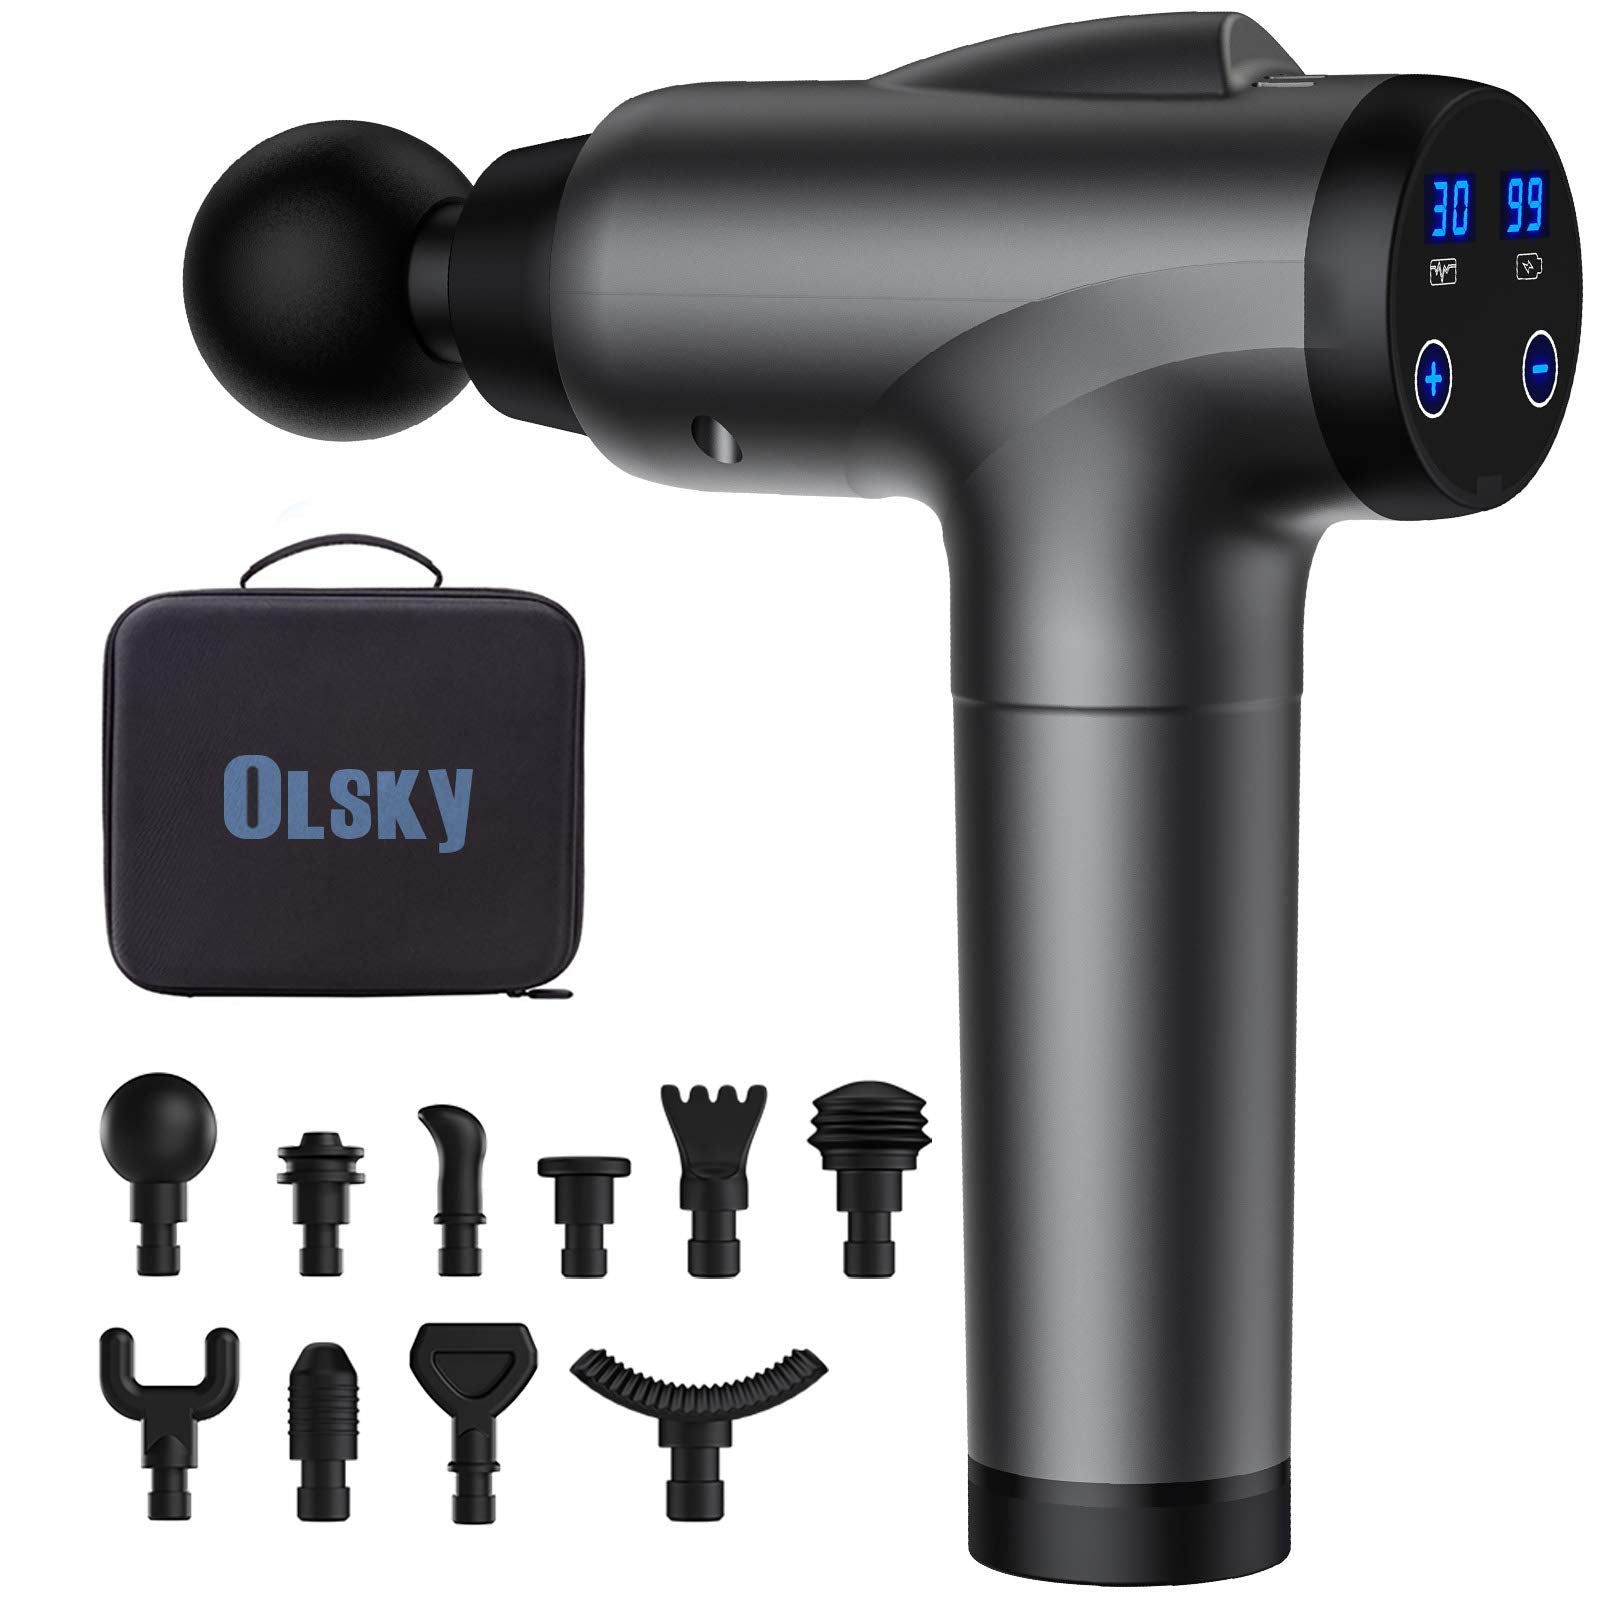 OLsky Massage Gun Deep Tissue, Handheld Electric Muscle Back Massager, High Intensity Percussion Massagers Device for Pain Relief with 9 Attachments & 30 Speed(Grey)